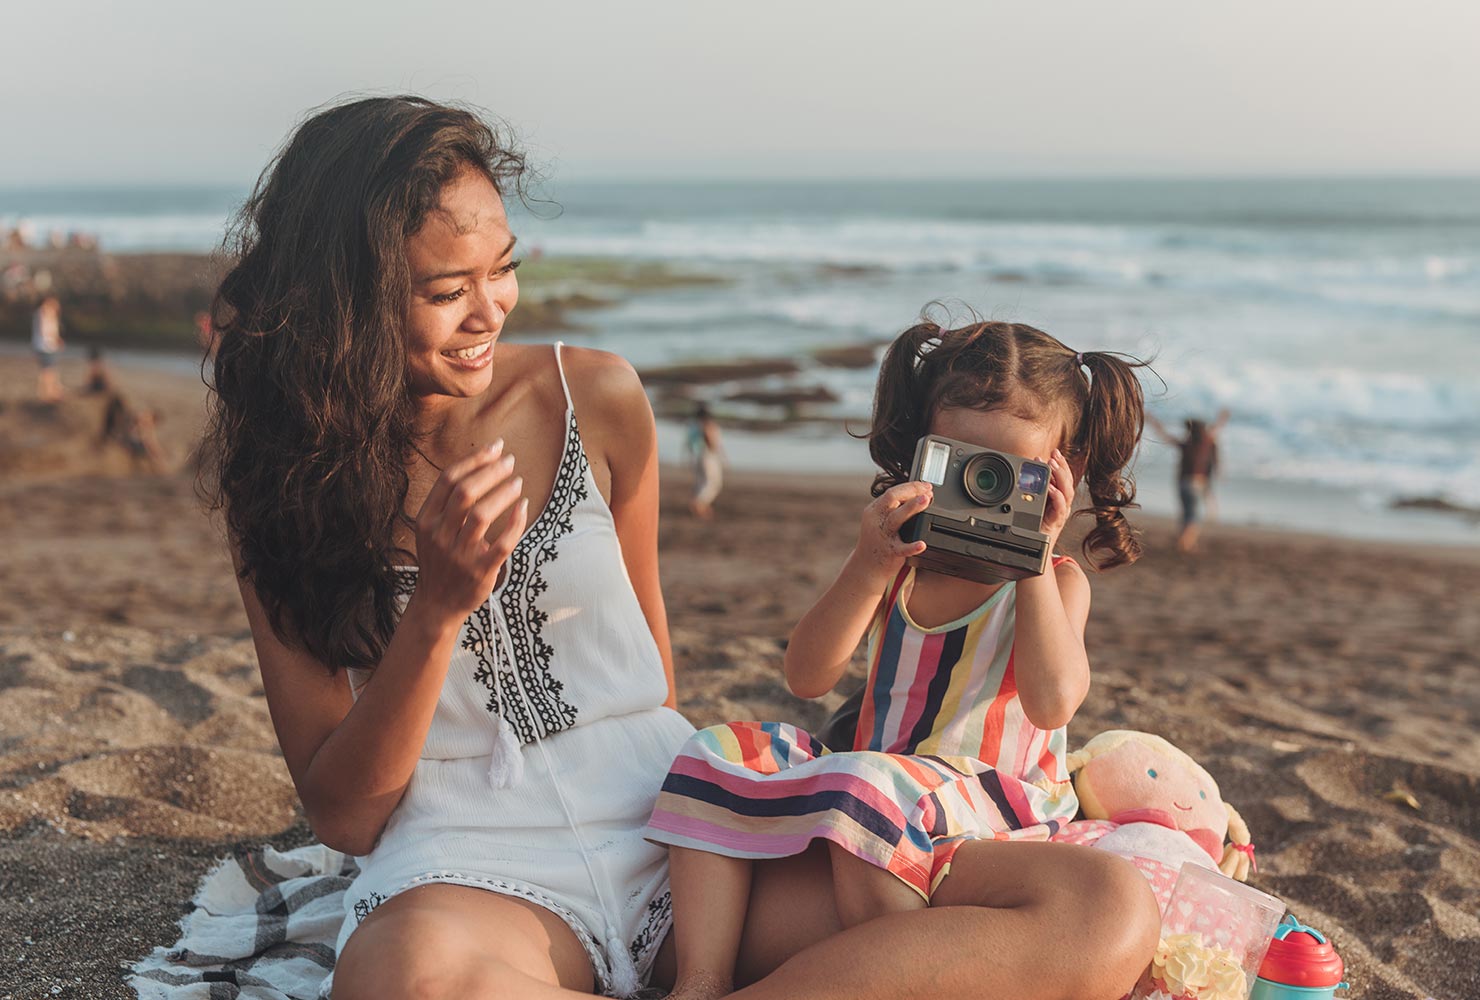 Mother and daughter on beach with camera.